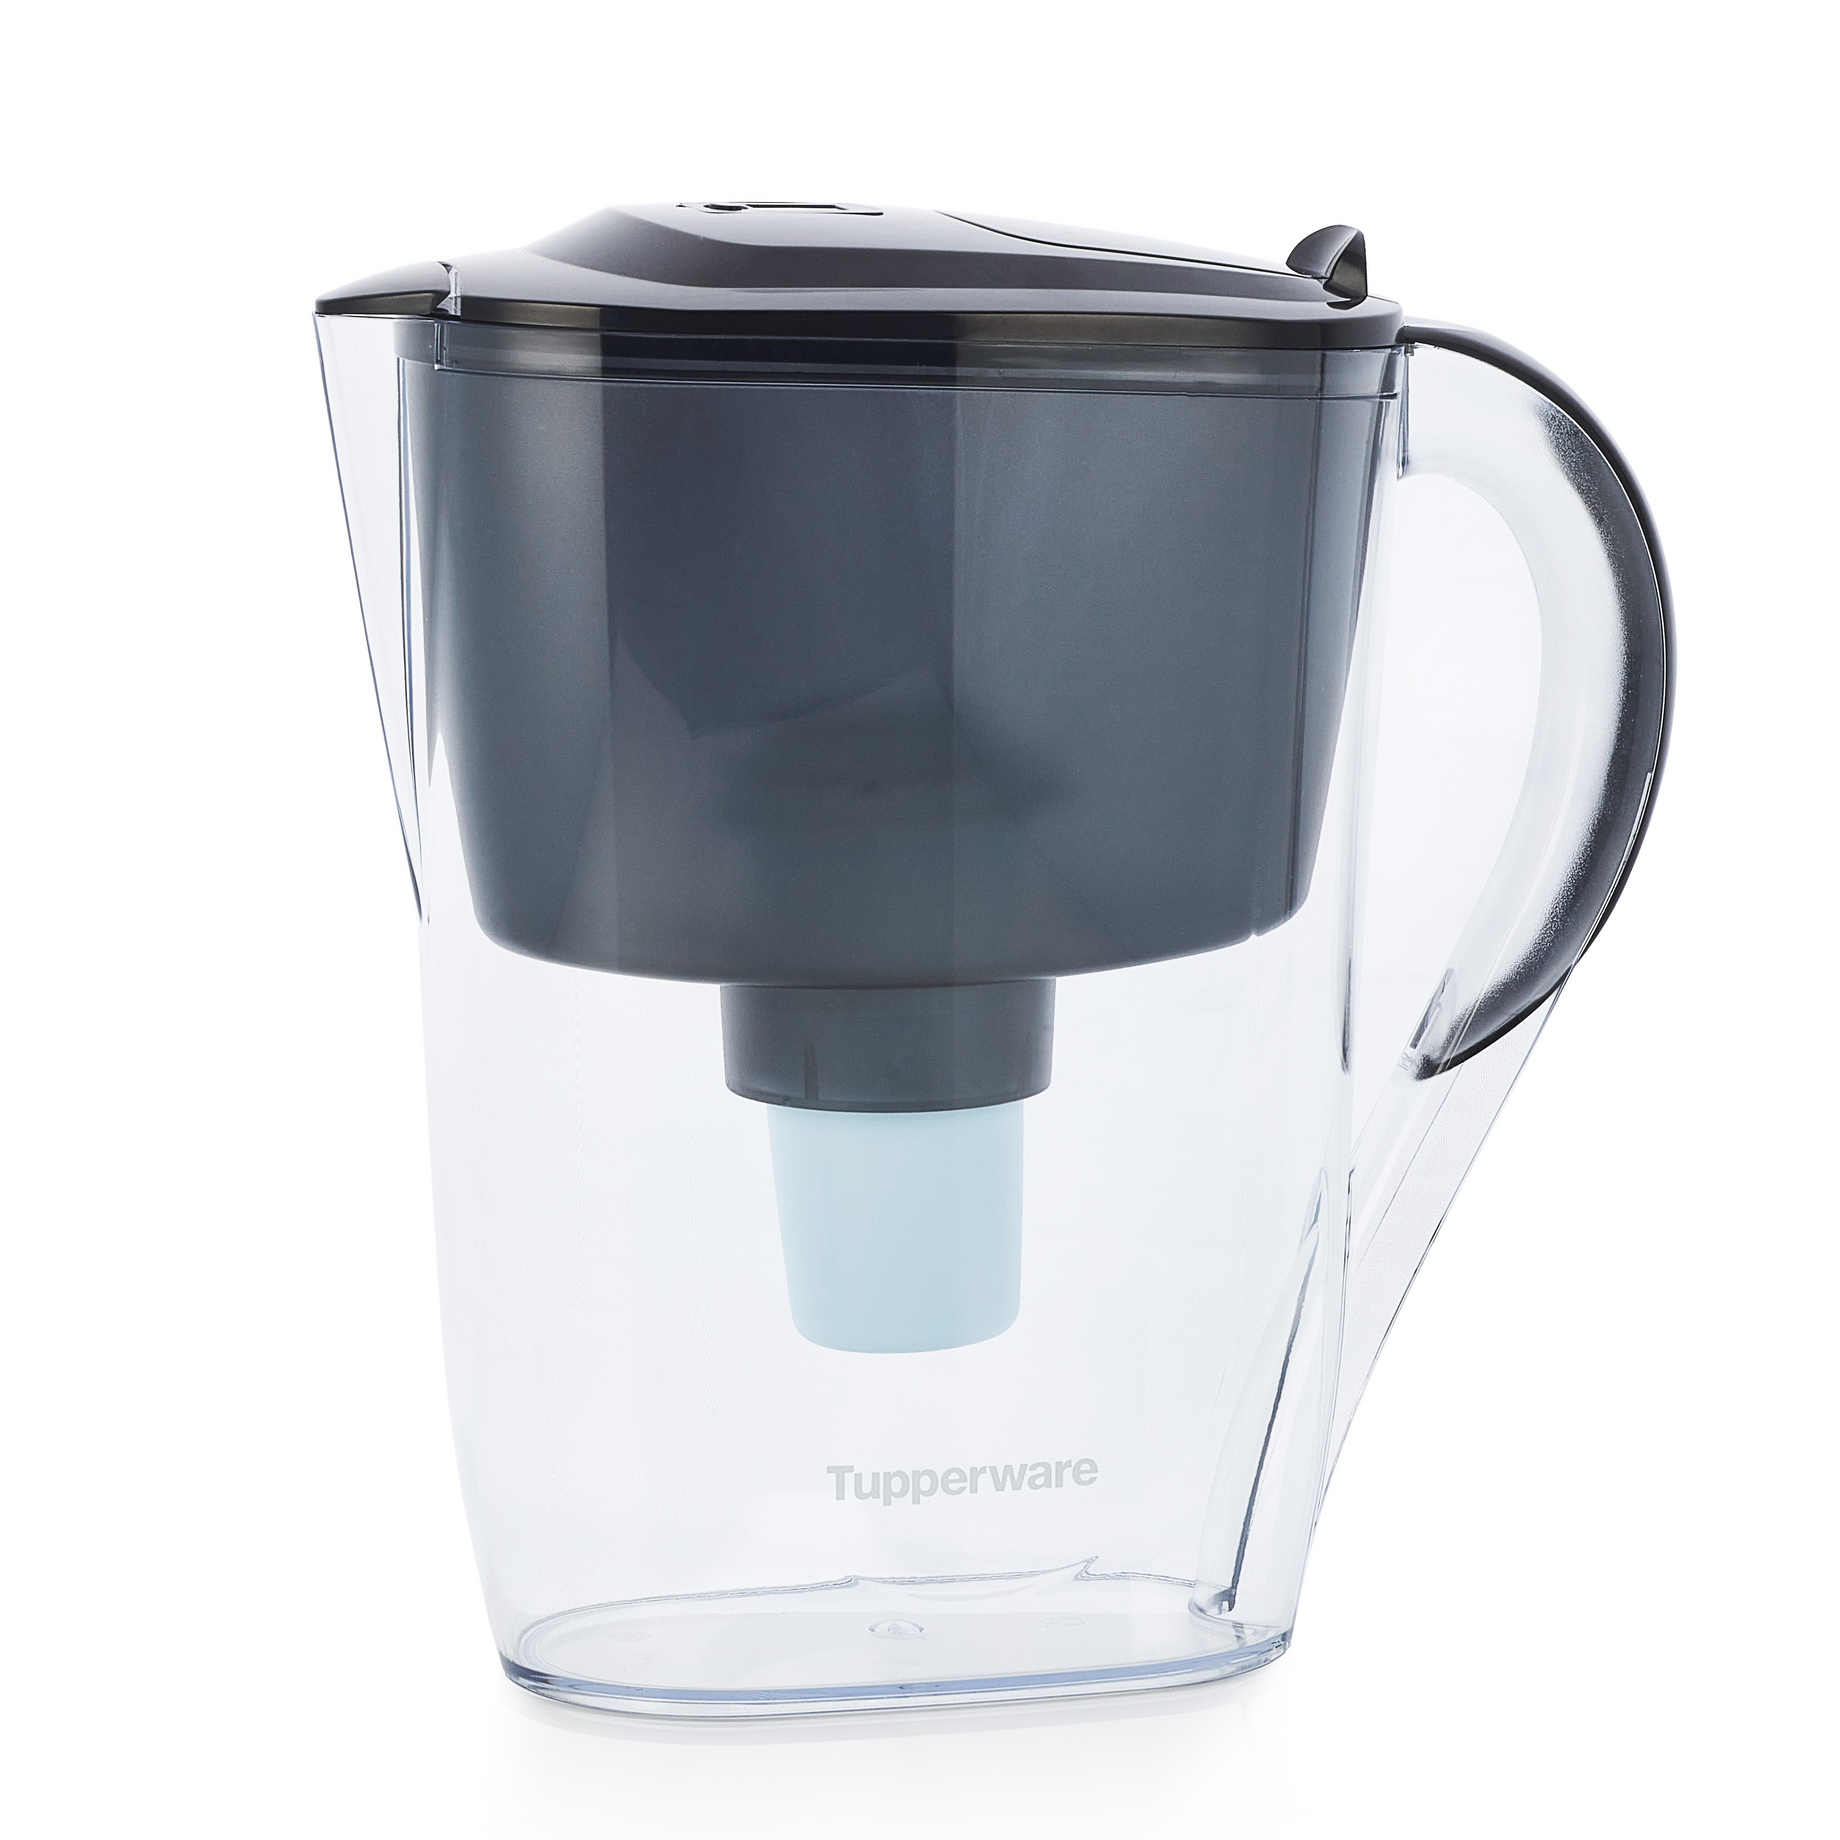 https://appng.tupperware.eu/service/appng/tupperware-products/rest/autoCrop/443180/1840/x